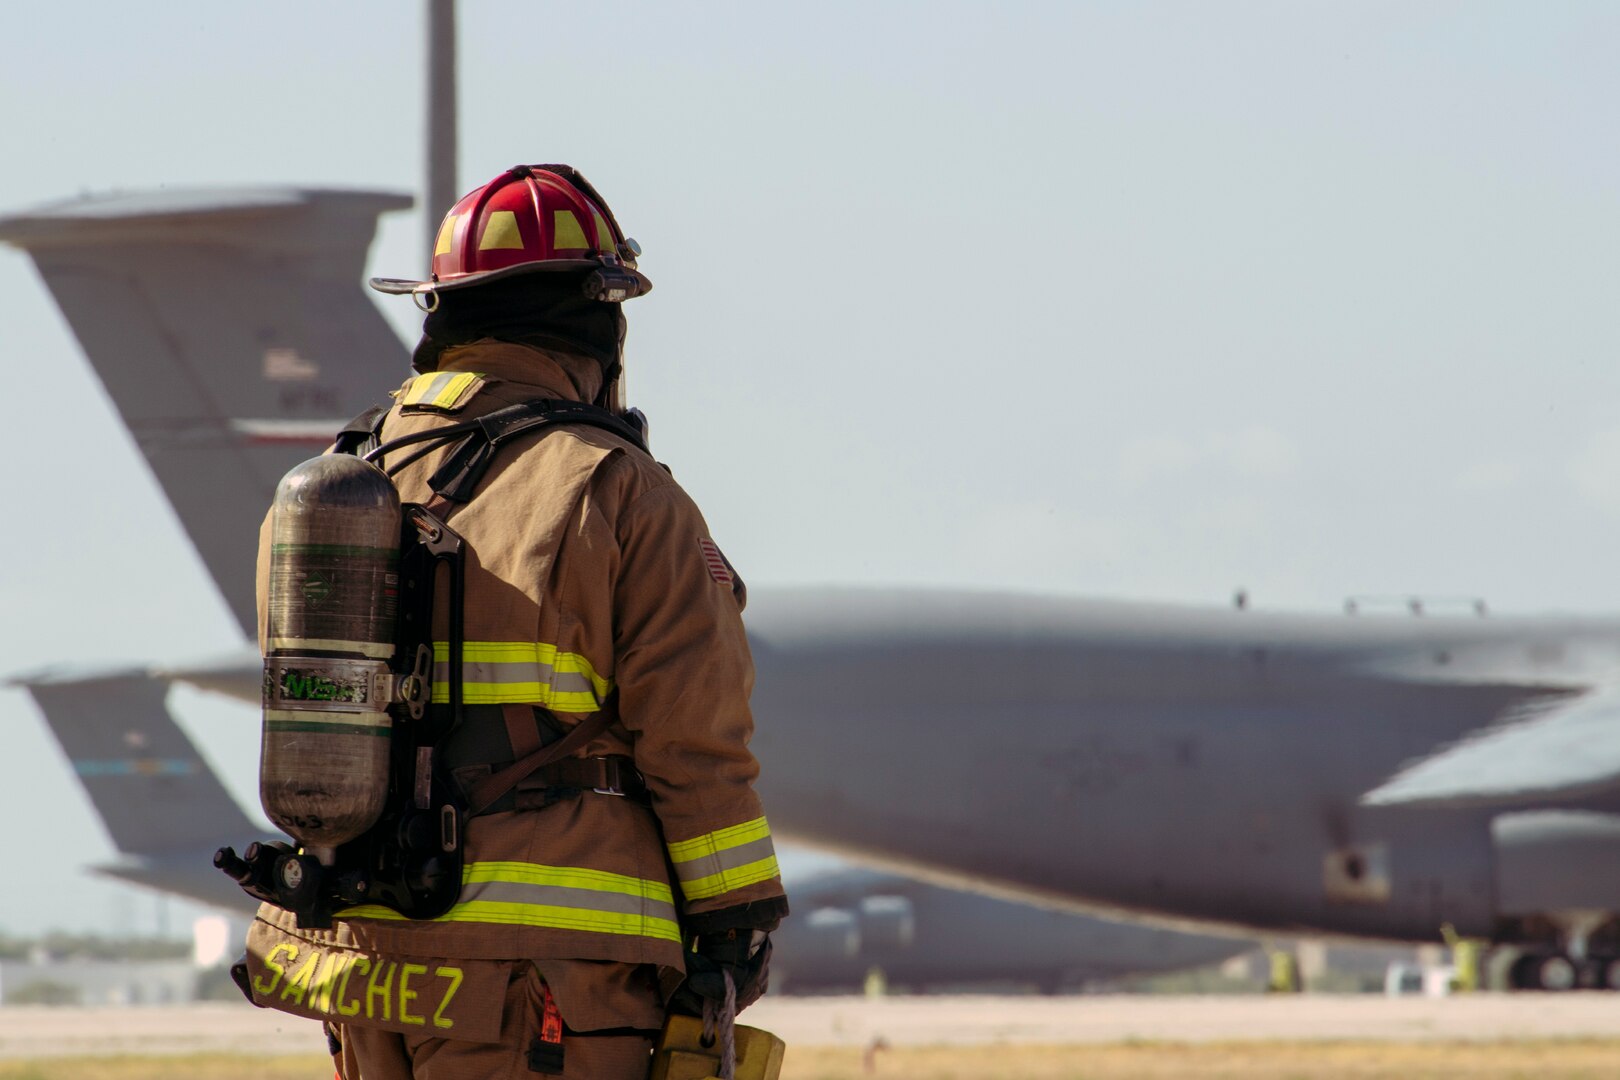 The 149th Fighter Wing and the 502nd Air Base Wing's 902nd Civil Engineer Squadron participated in a joint exercise